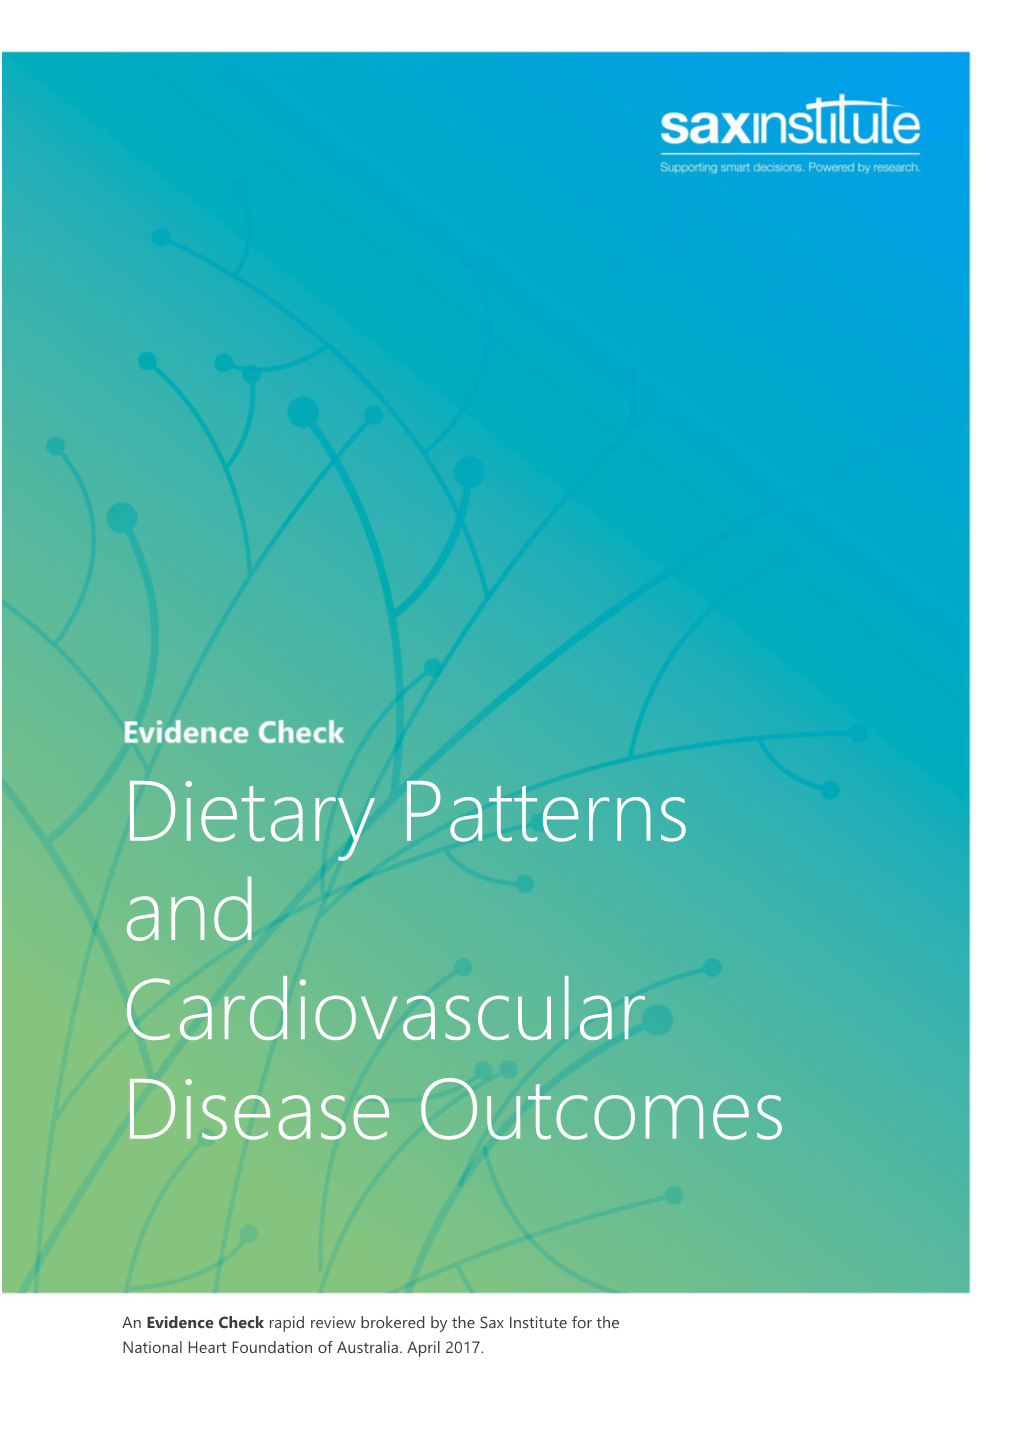 Dietary Patterns and Cardiovascular Disease Outcomes